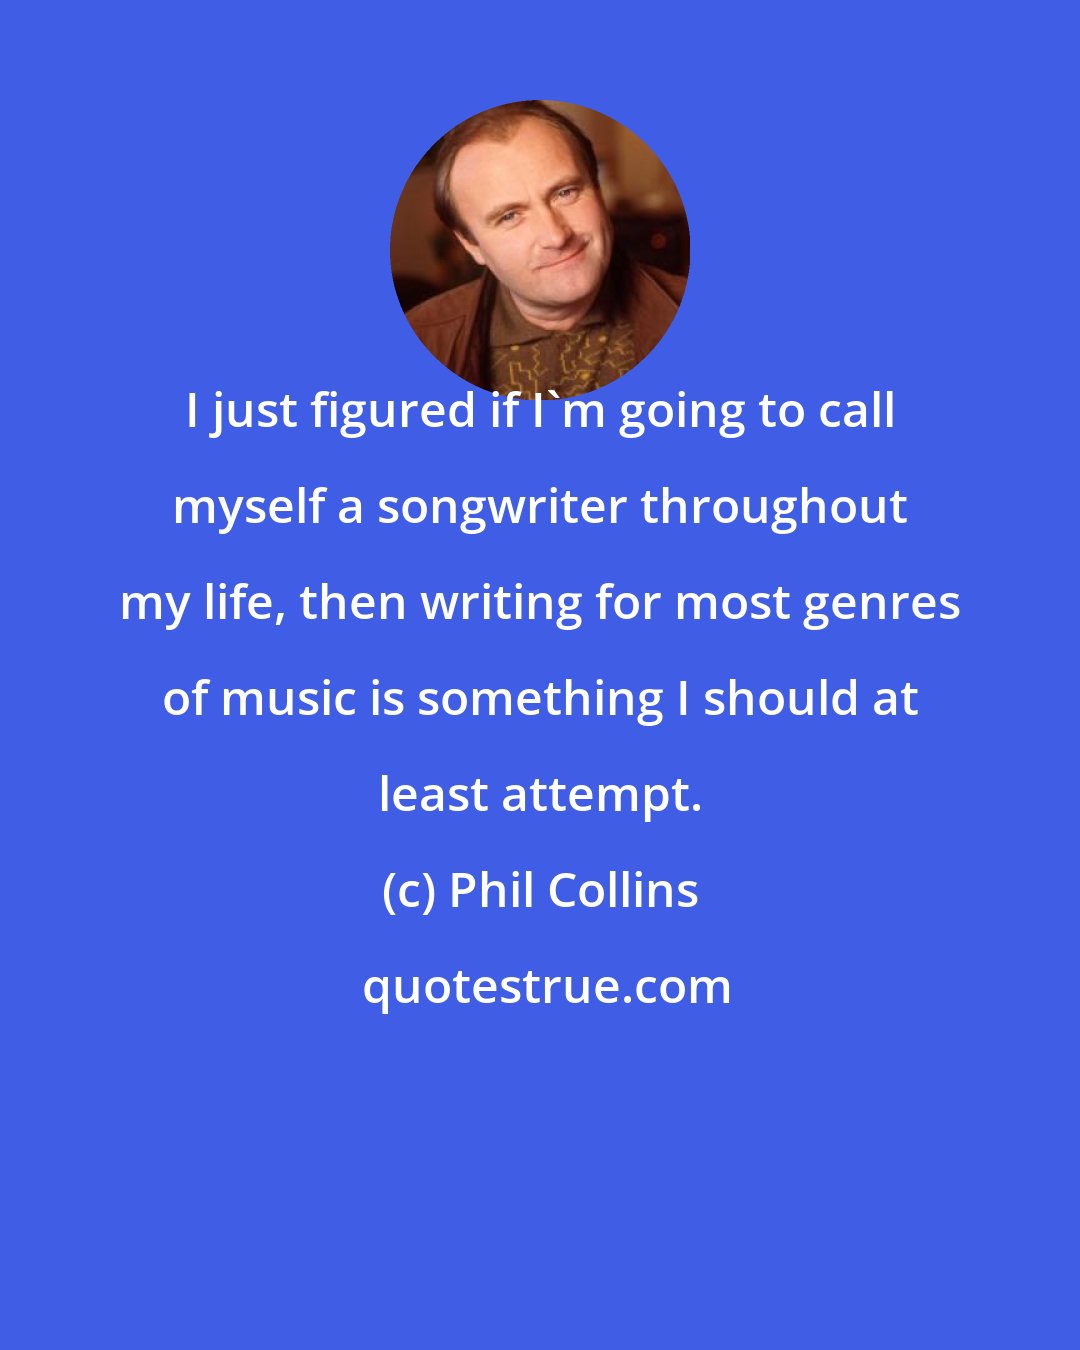 Phil Collins: I just figured if I'm going to call myself a songwriter throughout my life, then writing for most genres of music is something I should at least attempt.